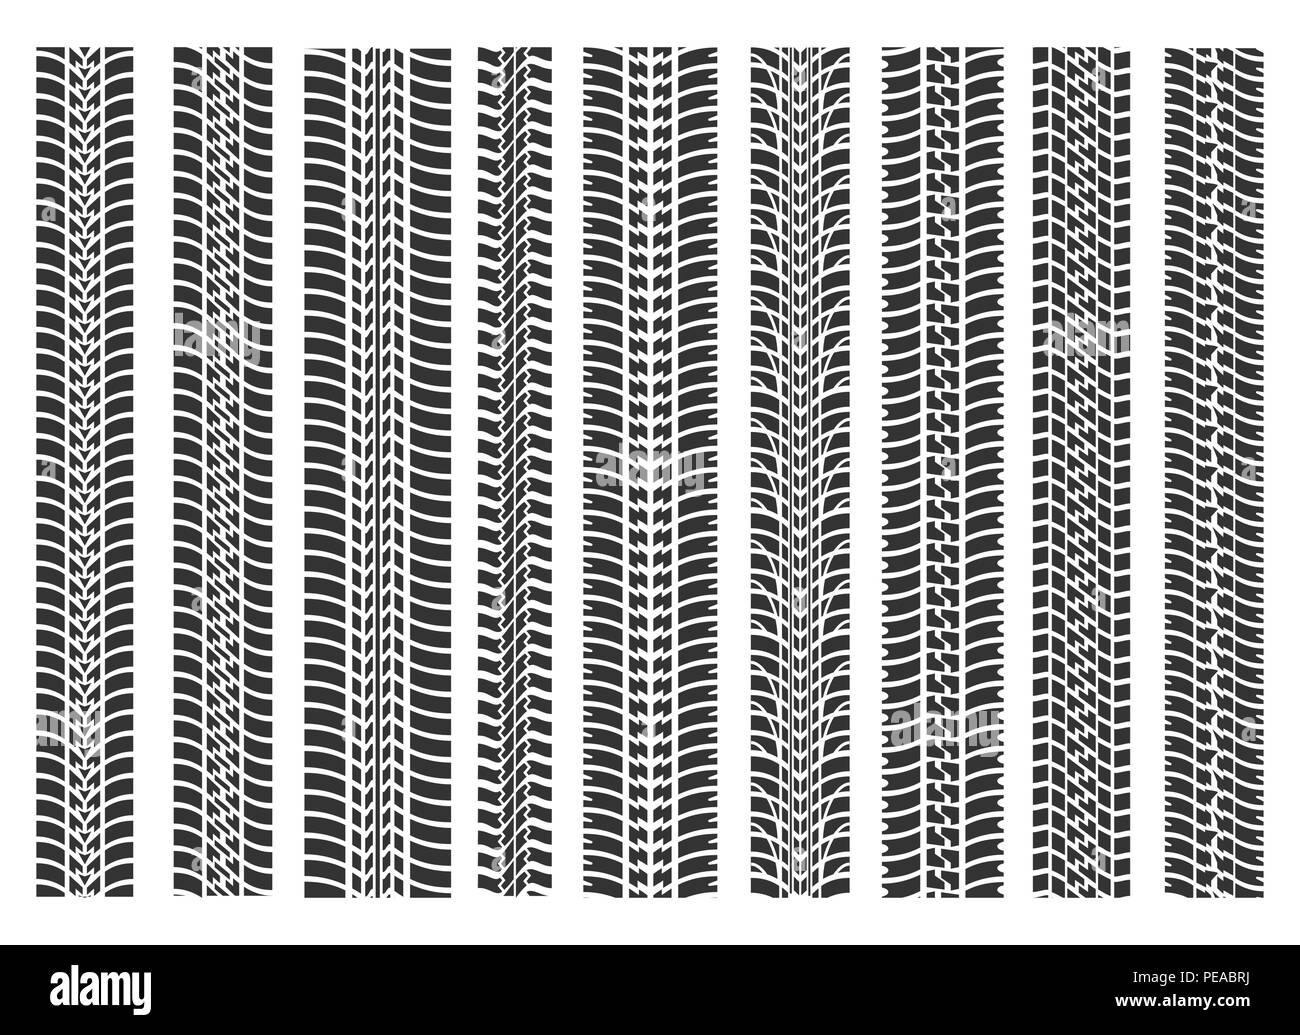 Tire tracks brushes. Bike or track road tyre track race textures, motorbike print silhouettes seamless pattern set Stock Vector